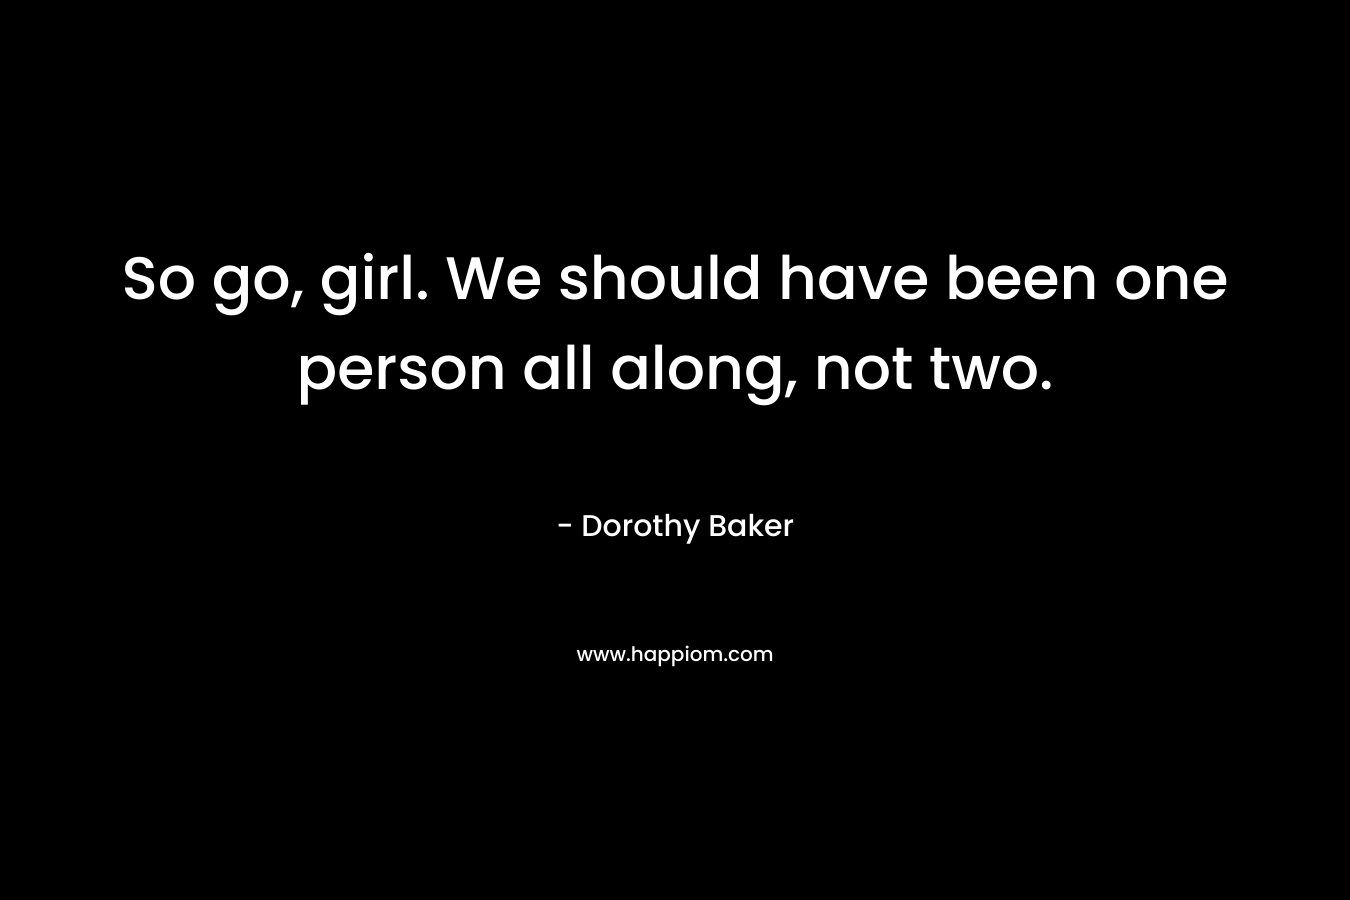 So go, girl. We should have been one person all along, not two. – Dorothy Baker